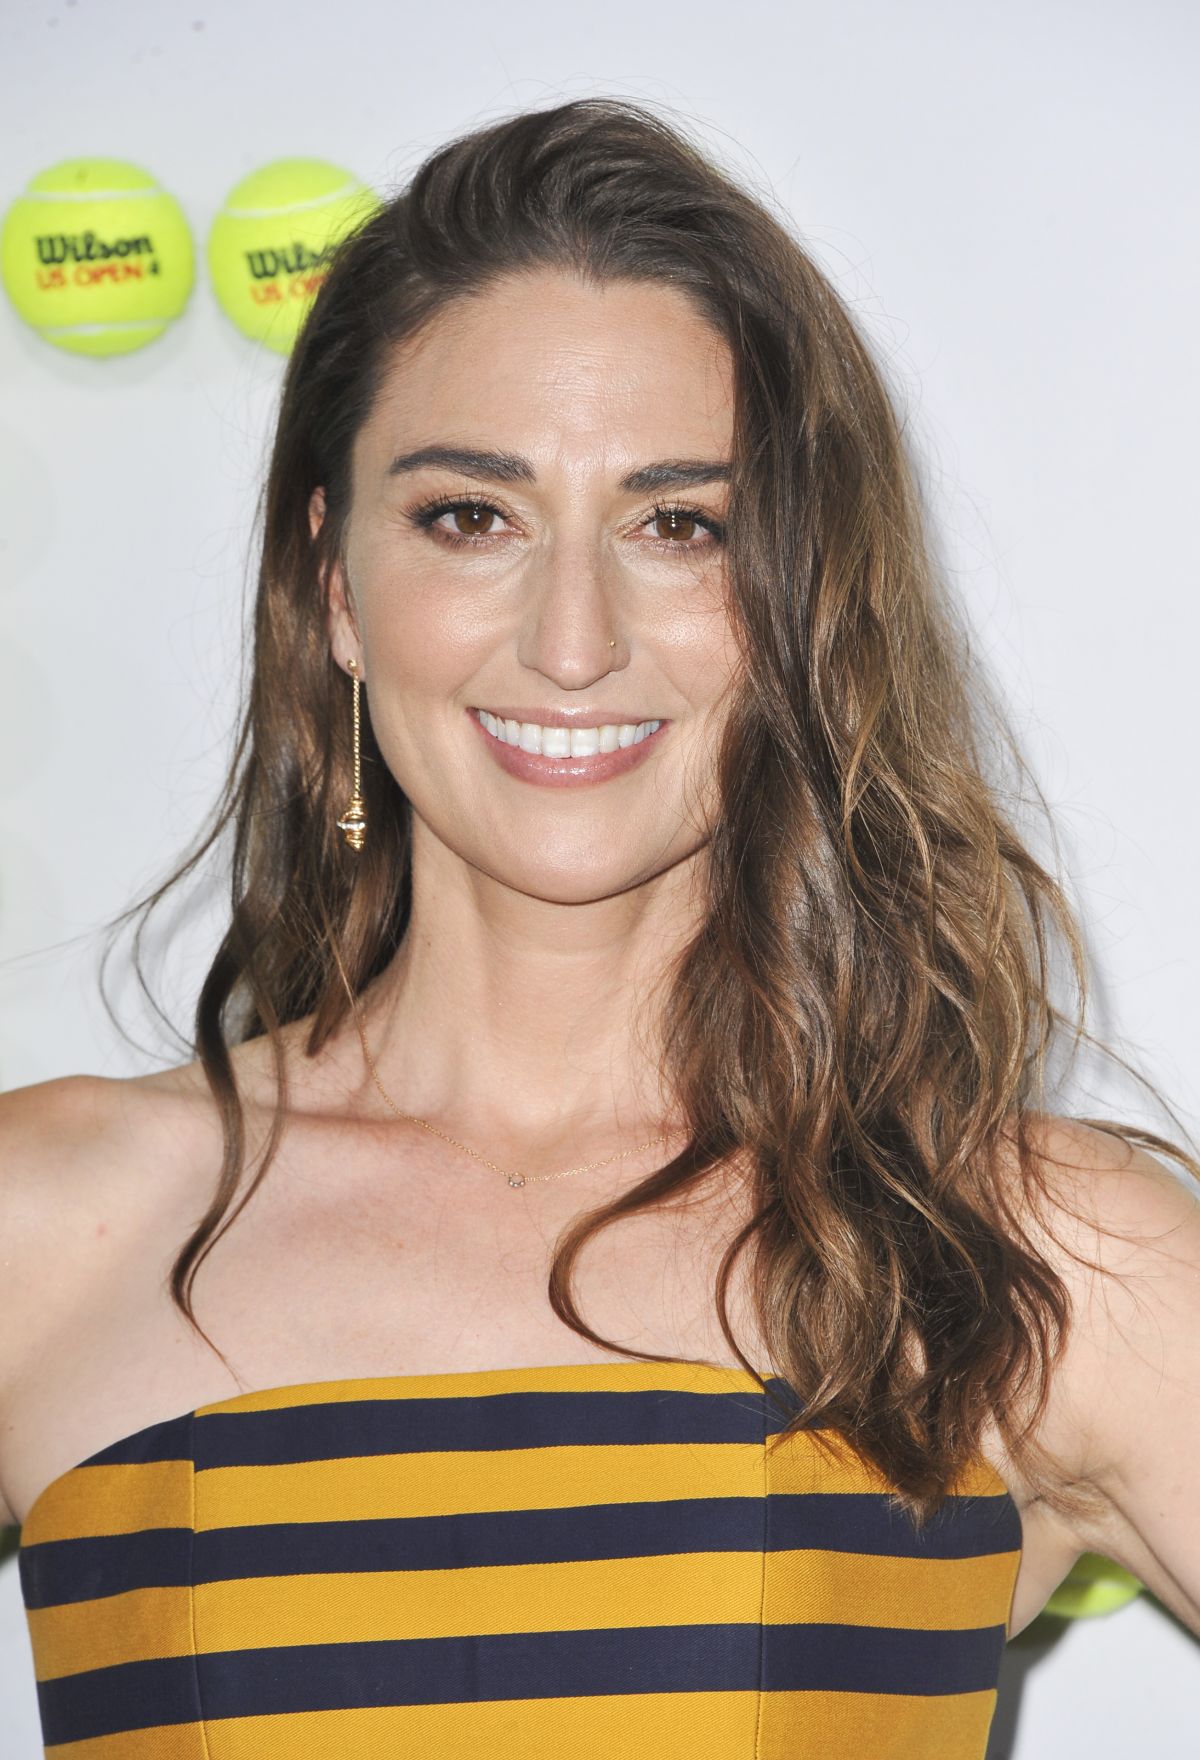 SARA BAREILLES at Battle of the Sexes Premiere in Los Angeles 09/16